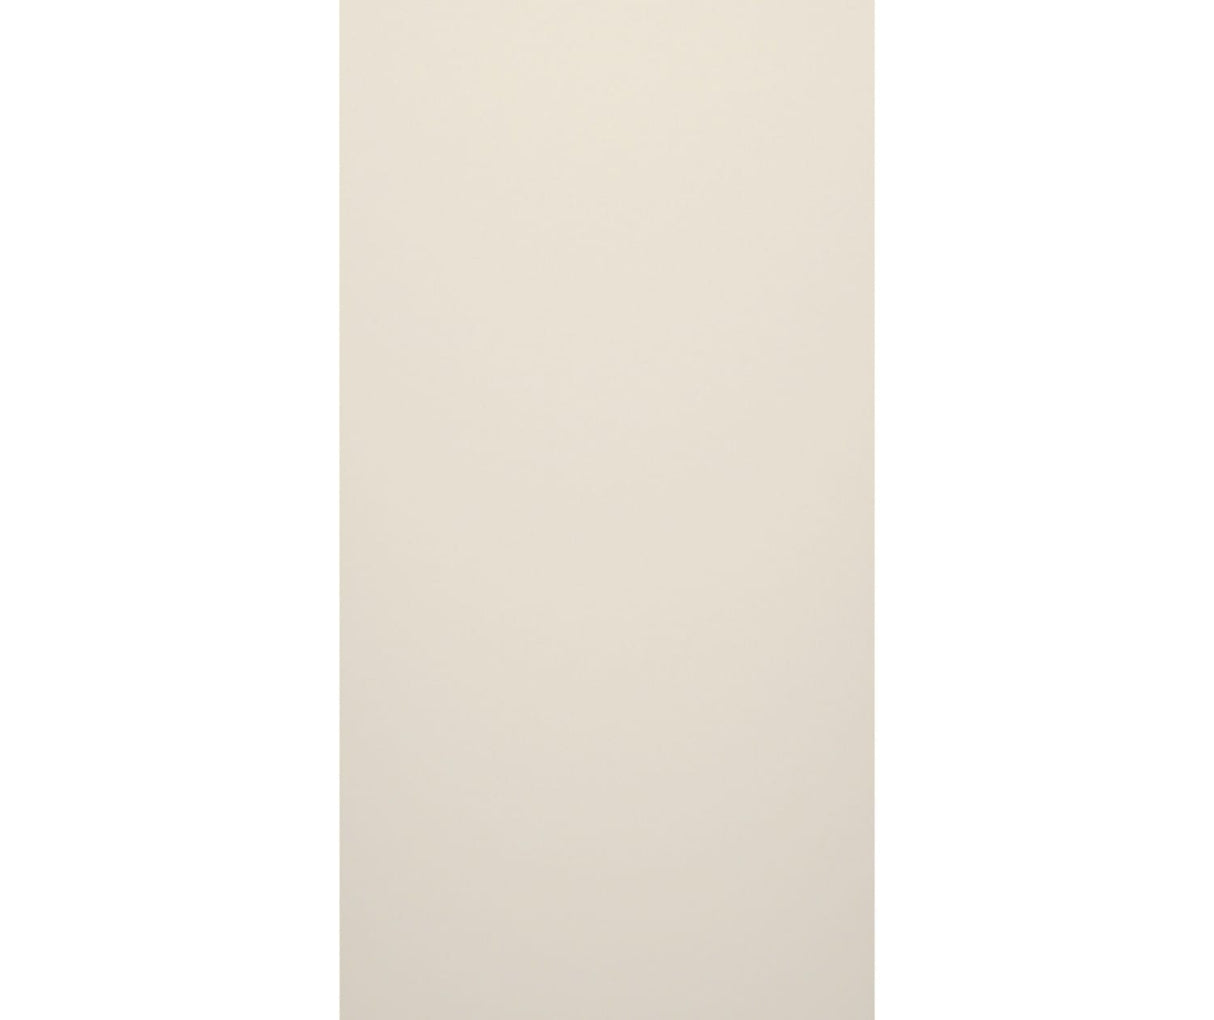 Swanstone SMMK-8462-1 62 x 84 Swanstone Smooth Tile Glue up Bathtub and Shower Single Wall Panel in Bisque SMMK8462.018